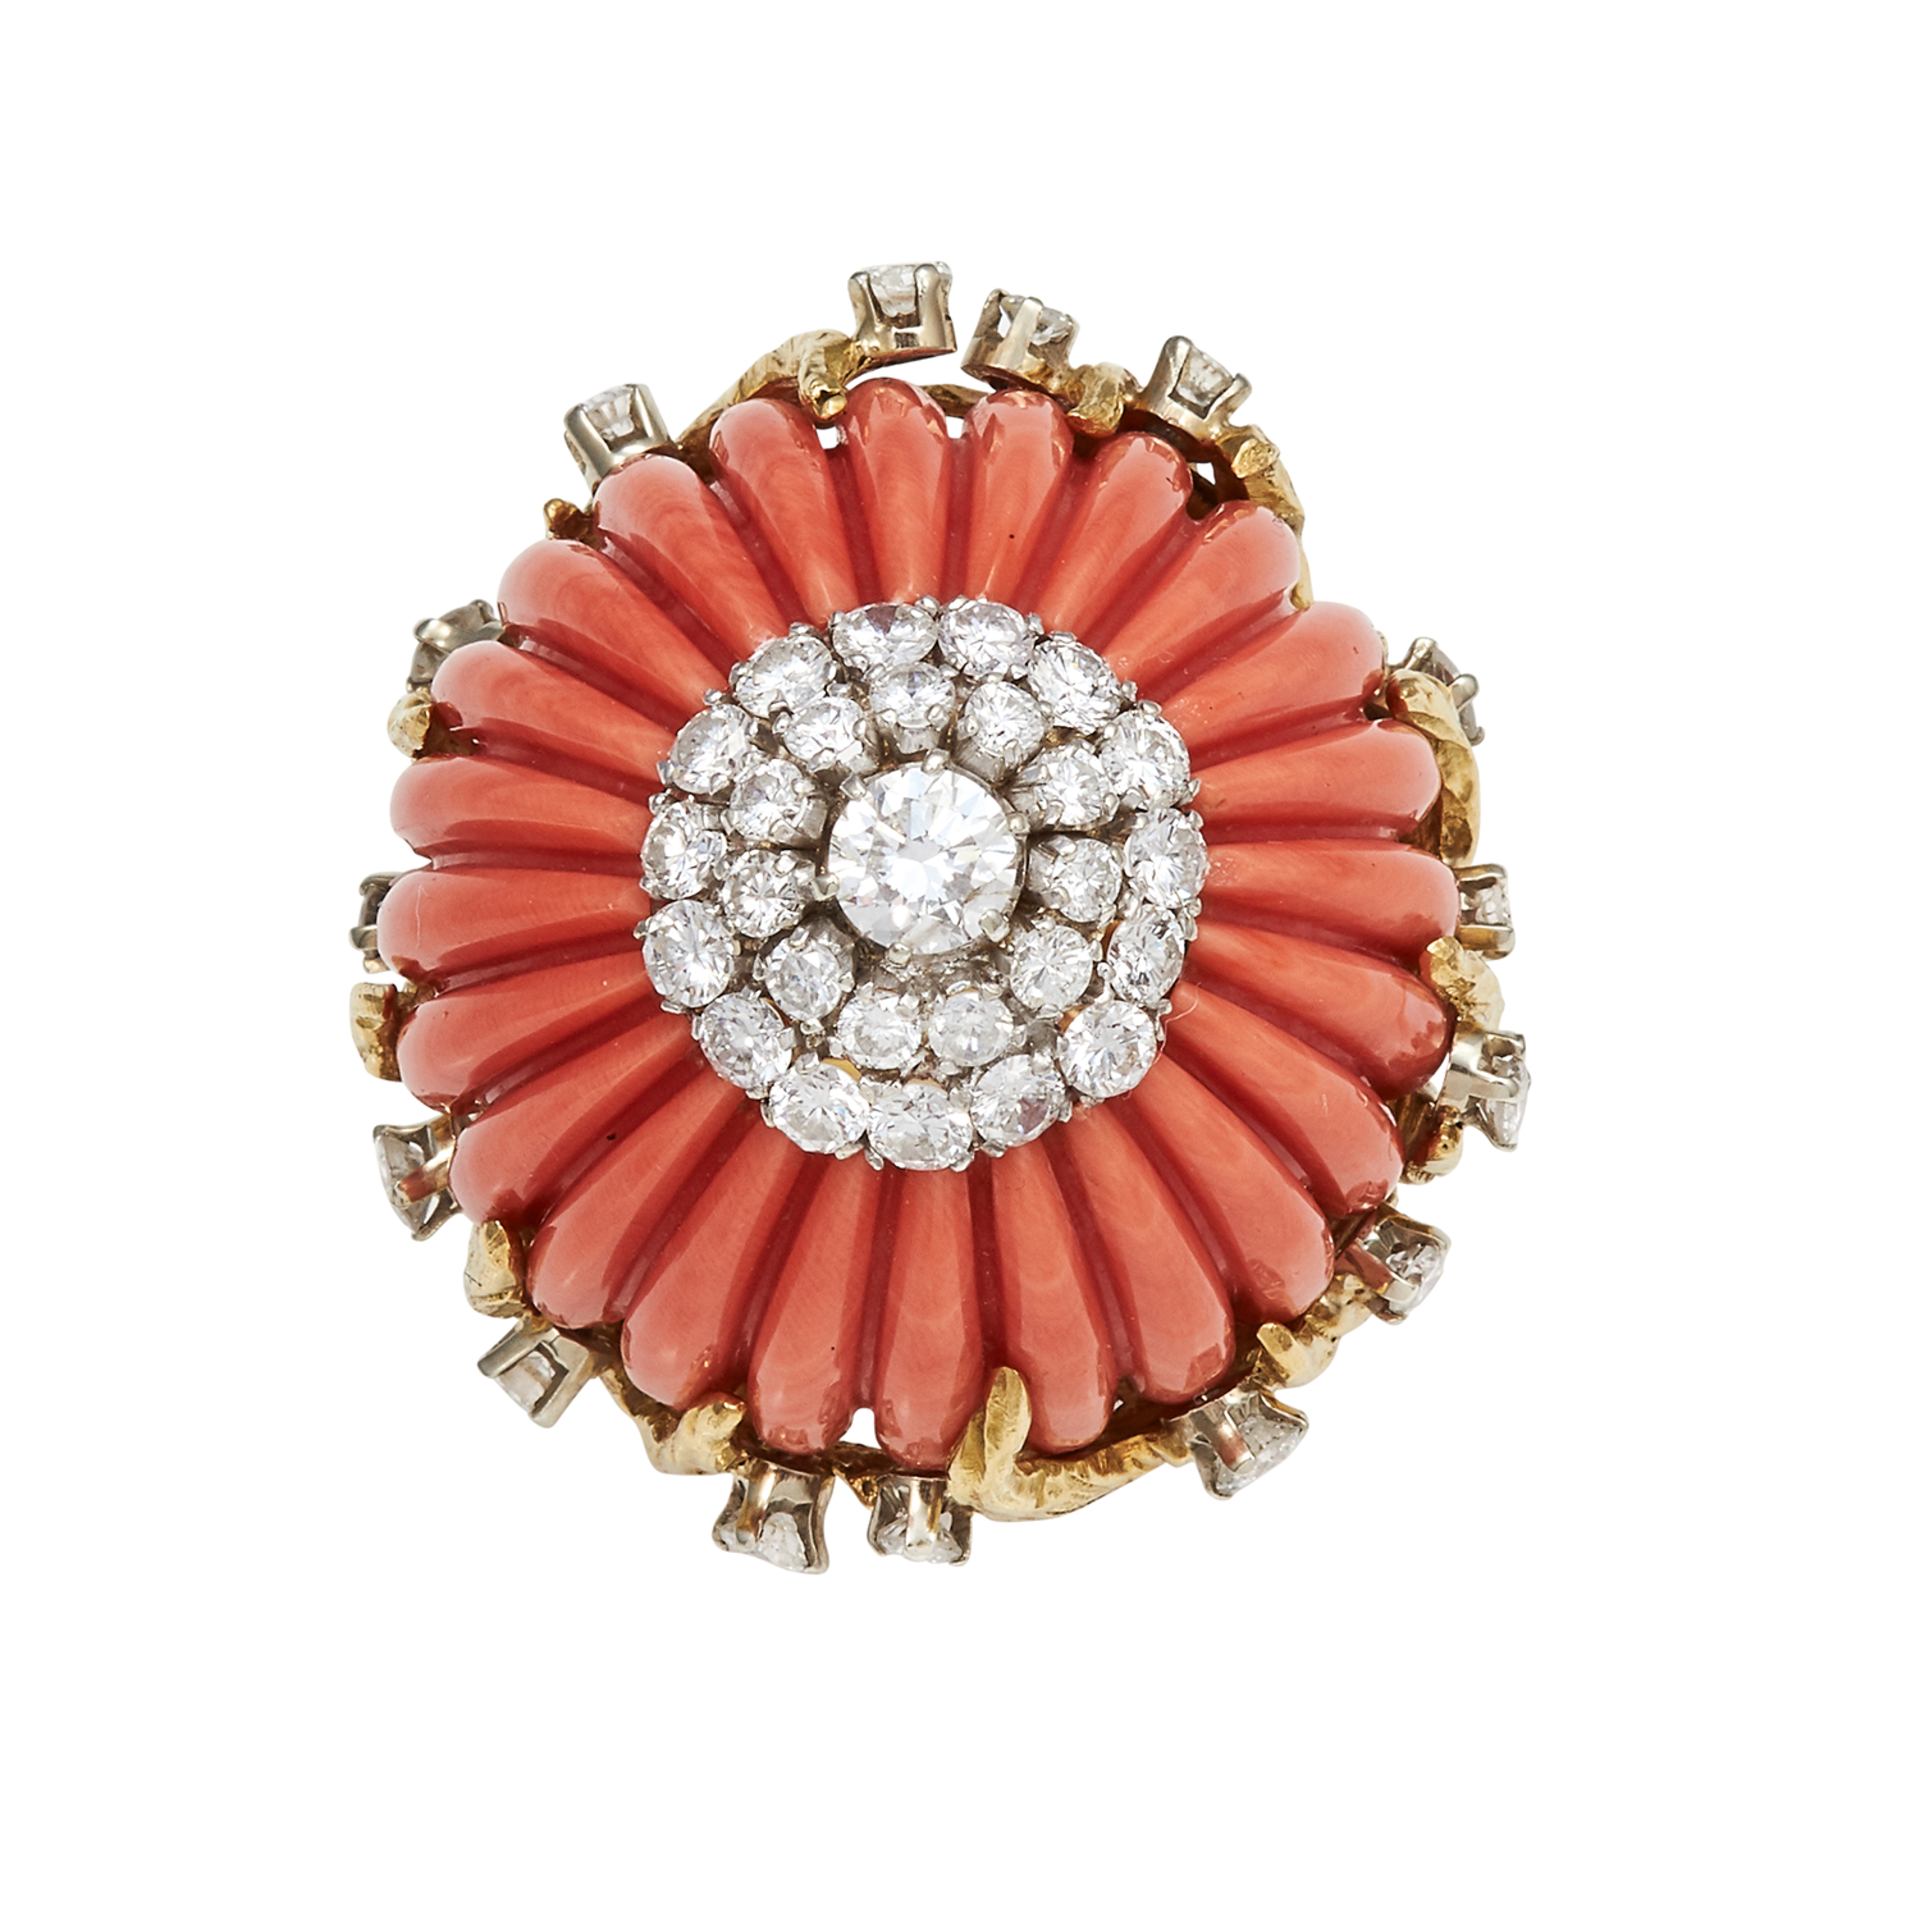 A VINTAGE CORAL AND DIAMOND COCKTAIL RING CIRCA 1970 in high carat yellow gold, of bombe form, the